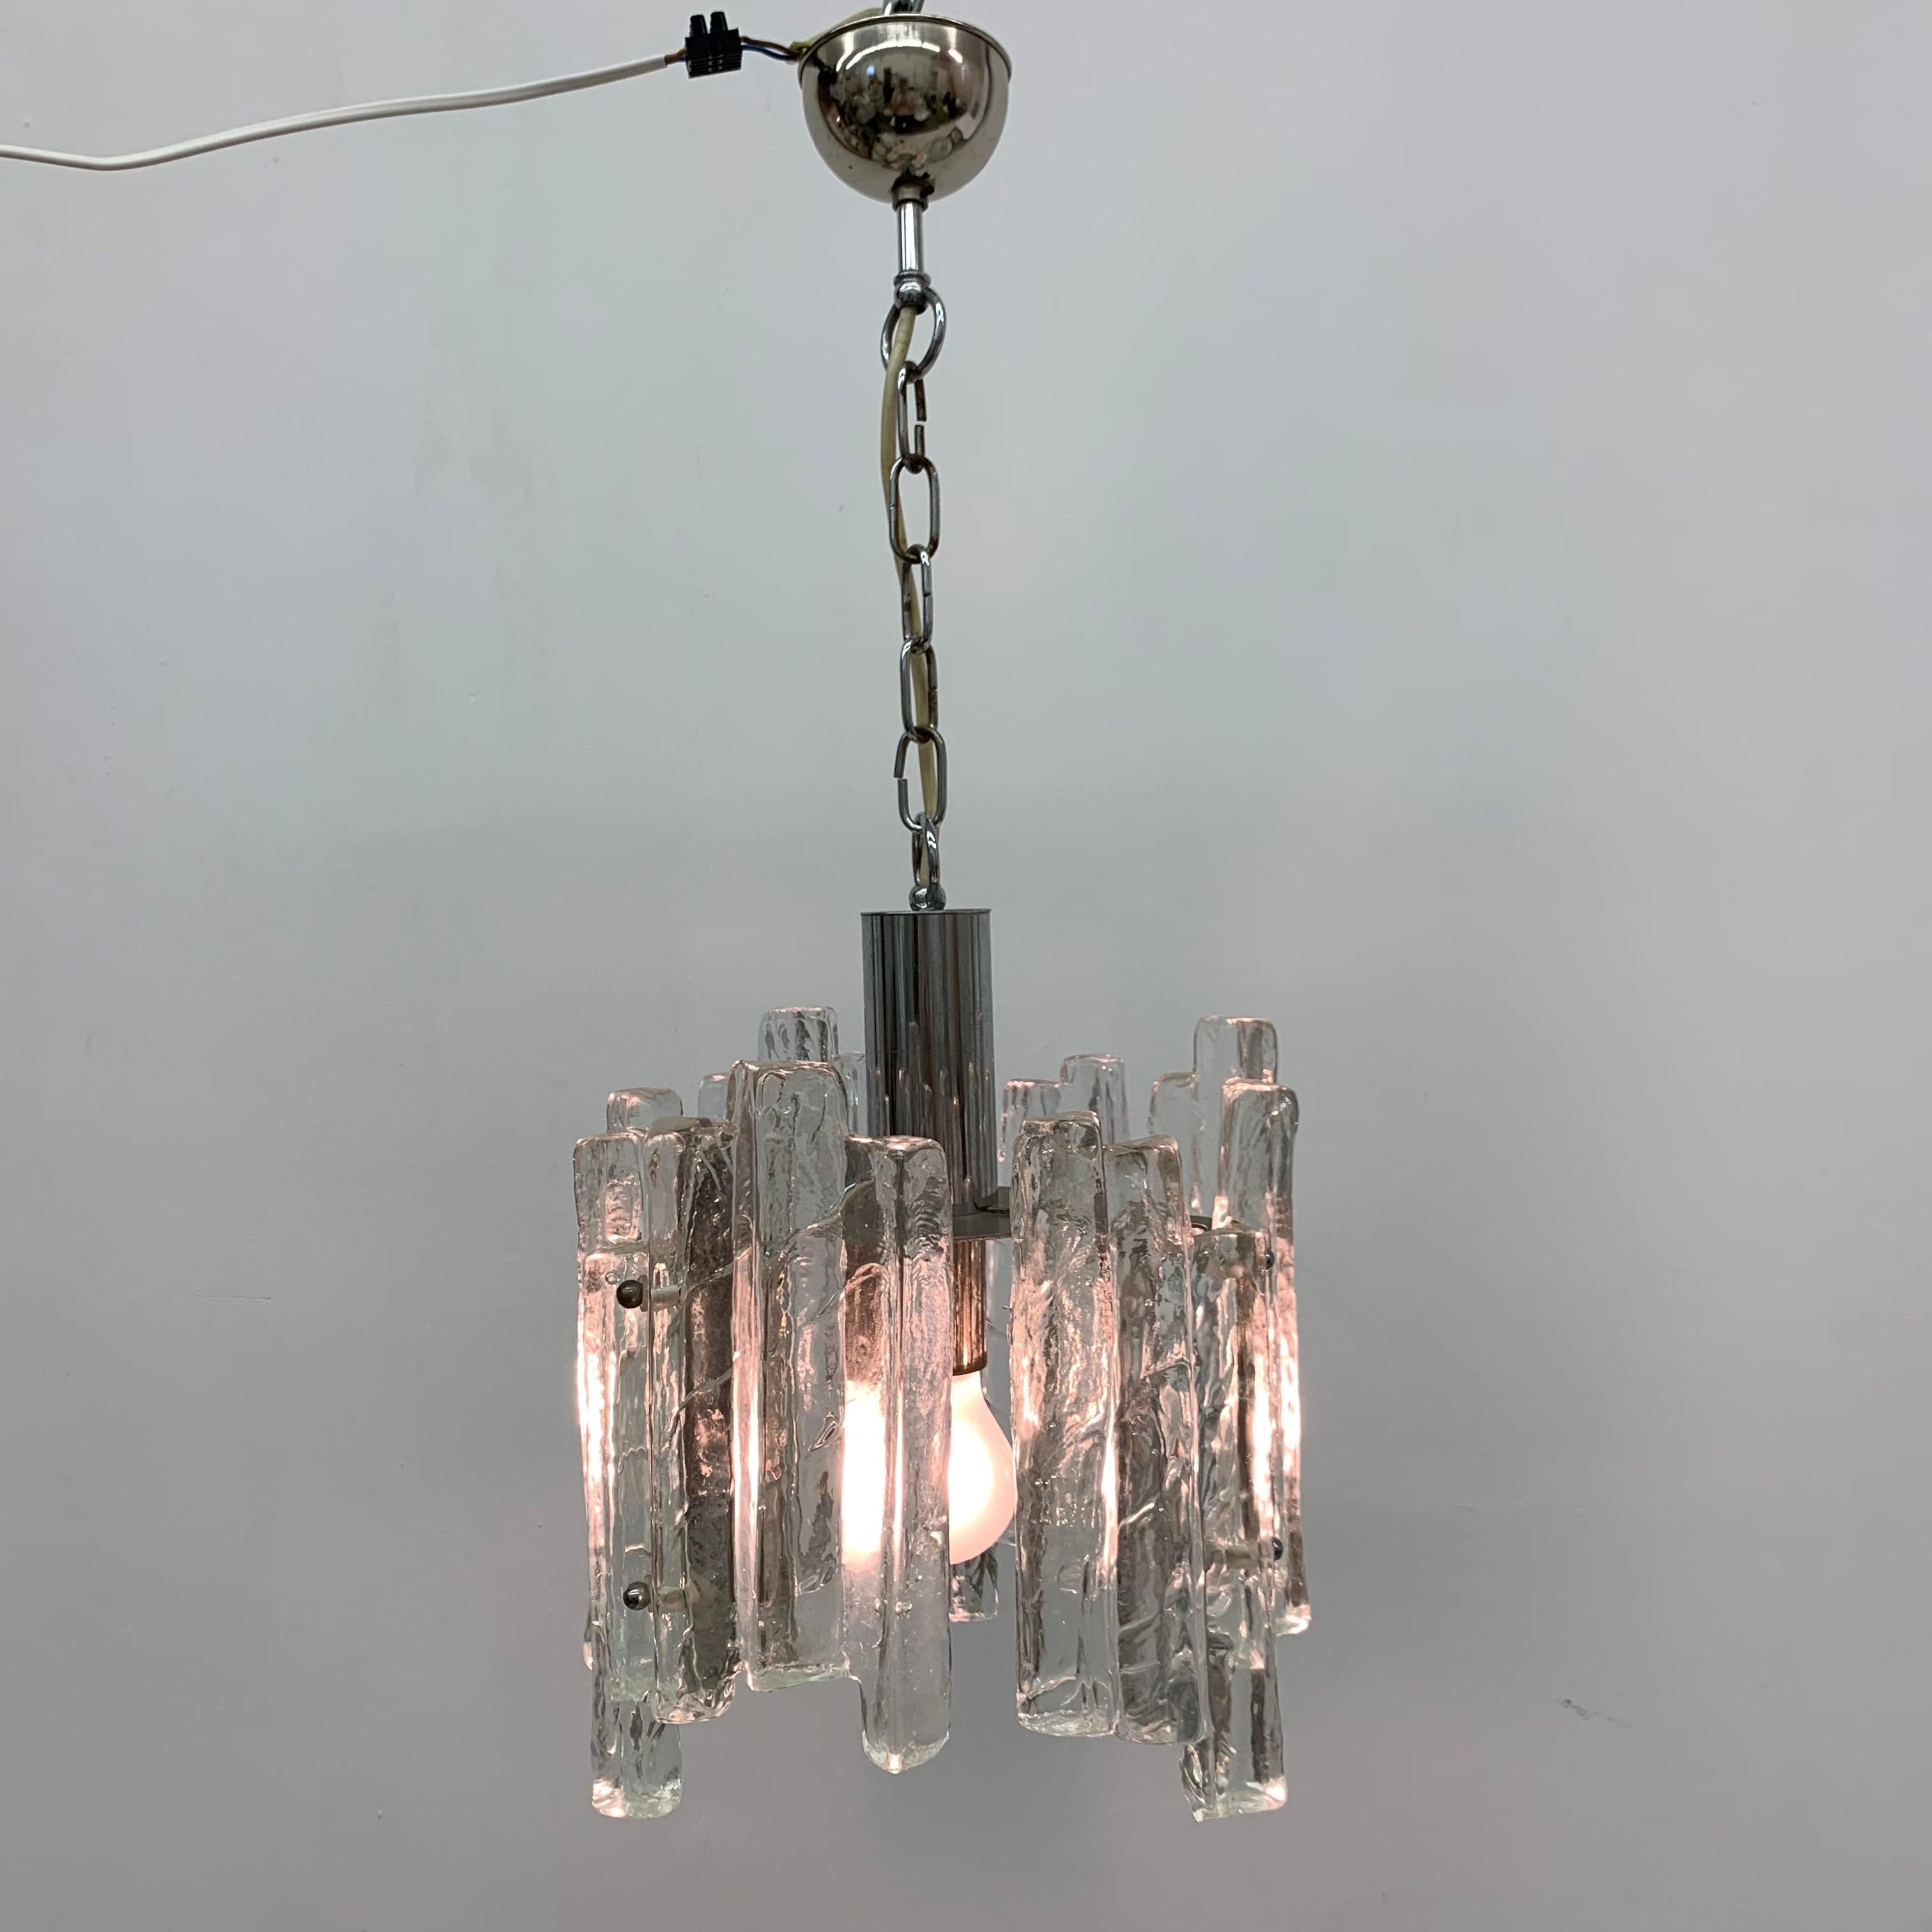 Hanging lamp in Frosted Ice Glass by J. T. Kalmar for Kalmar Franken KG, 1960s For Sale 14